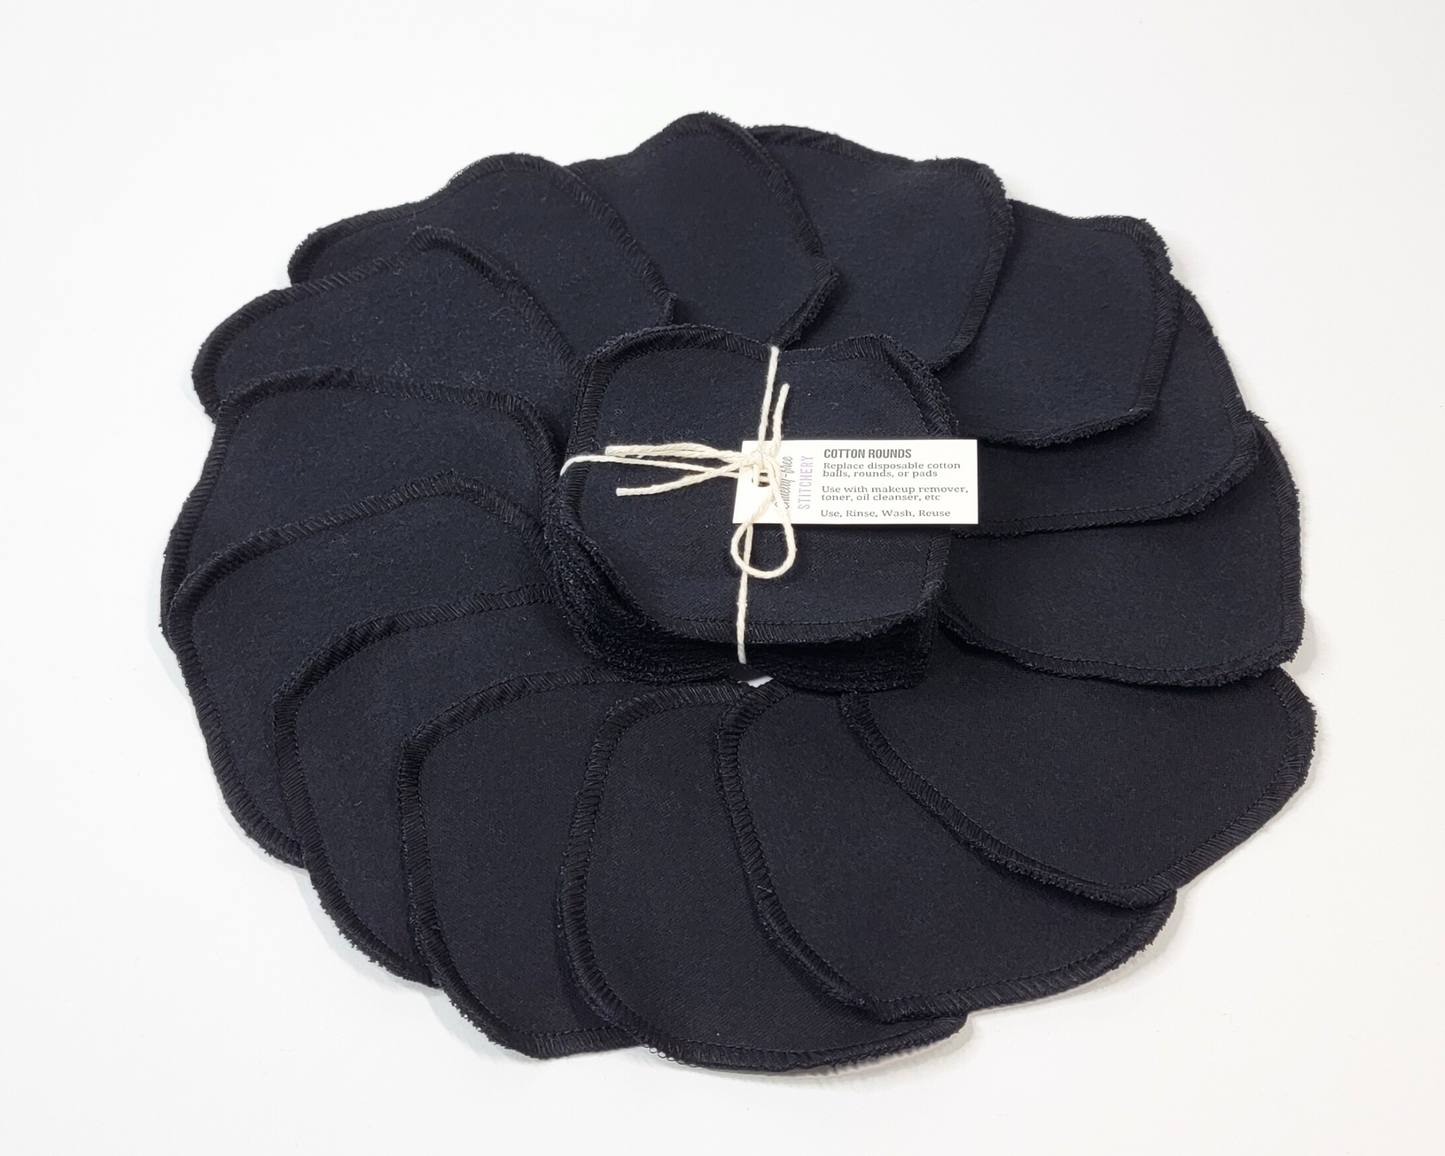 Black reusable cotton rounds arranged in a circle, with a bundled pack in the center. They are solid black with black stitching on the edges.